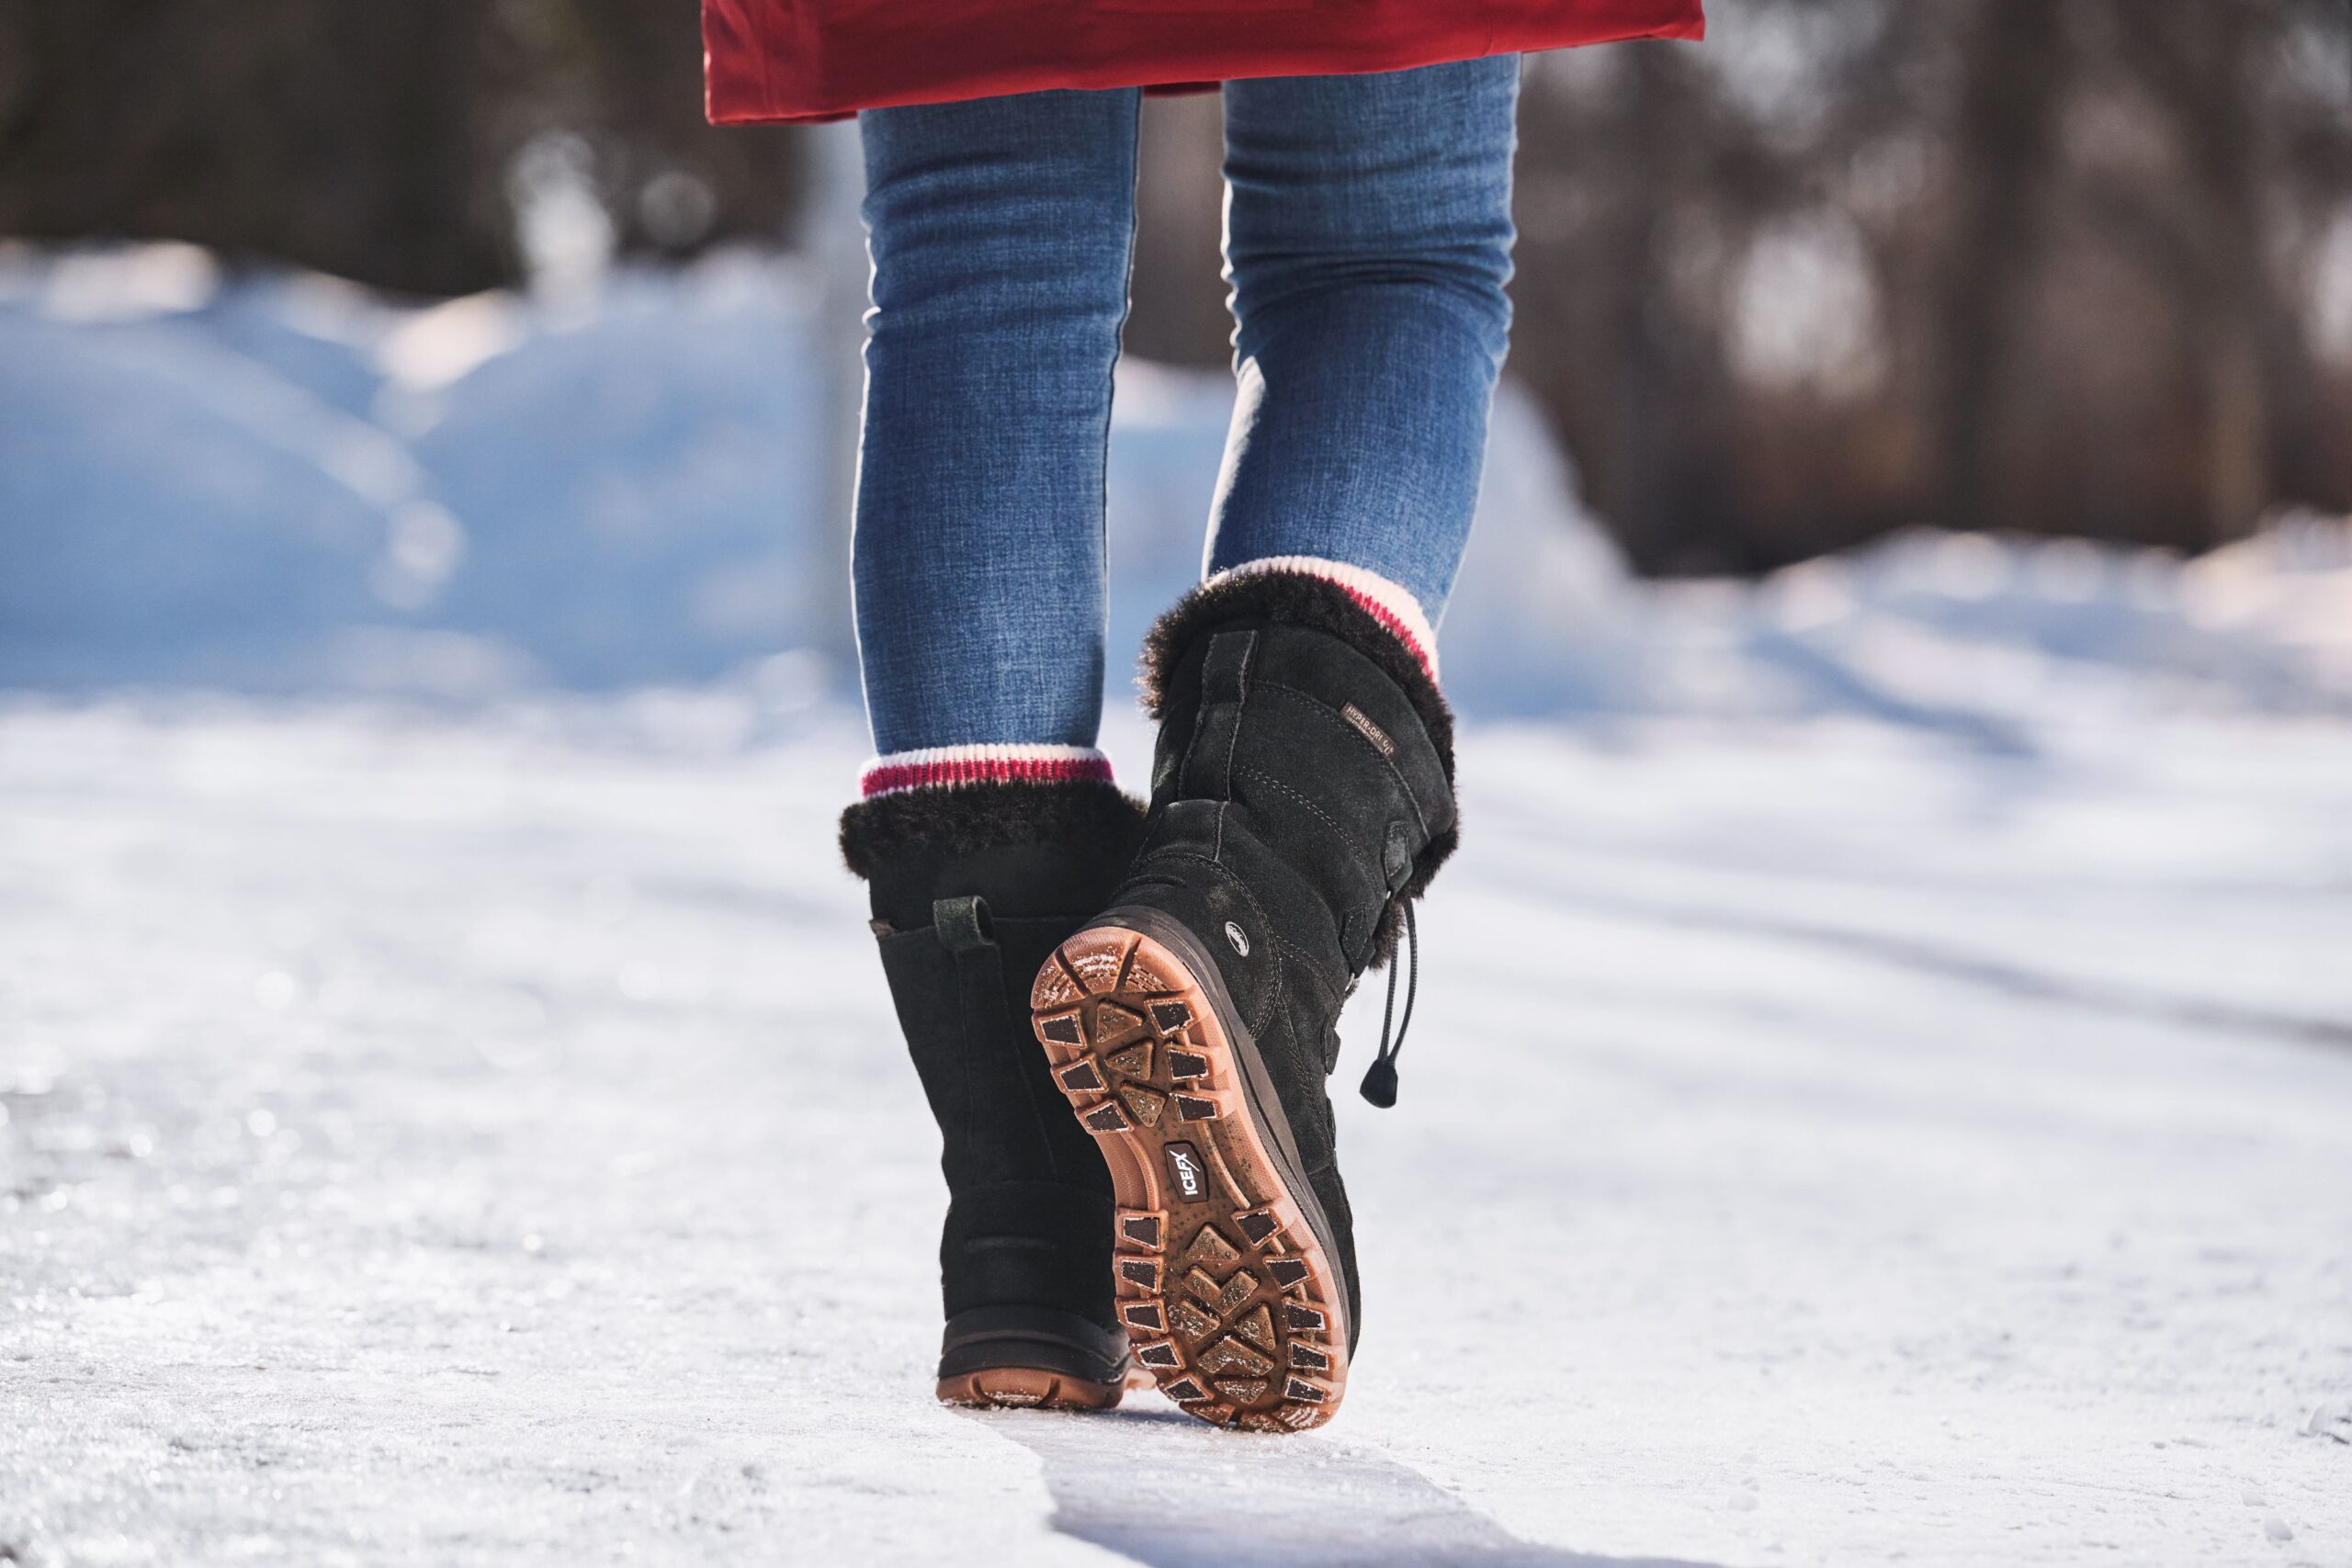 Person walking on snowy ground in winter boots.